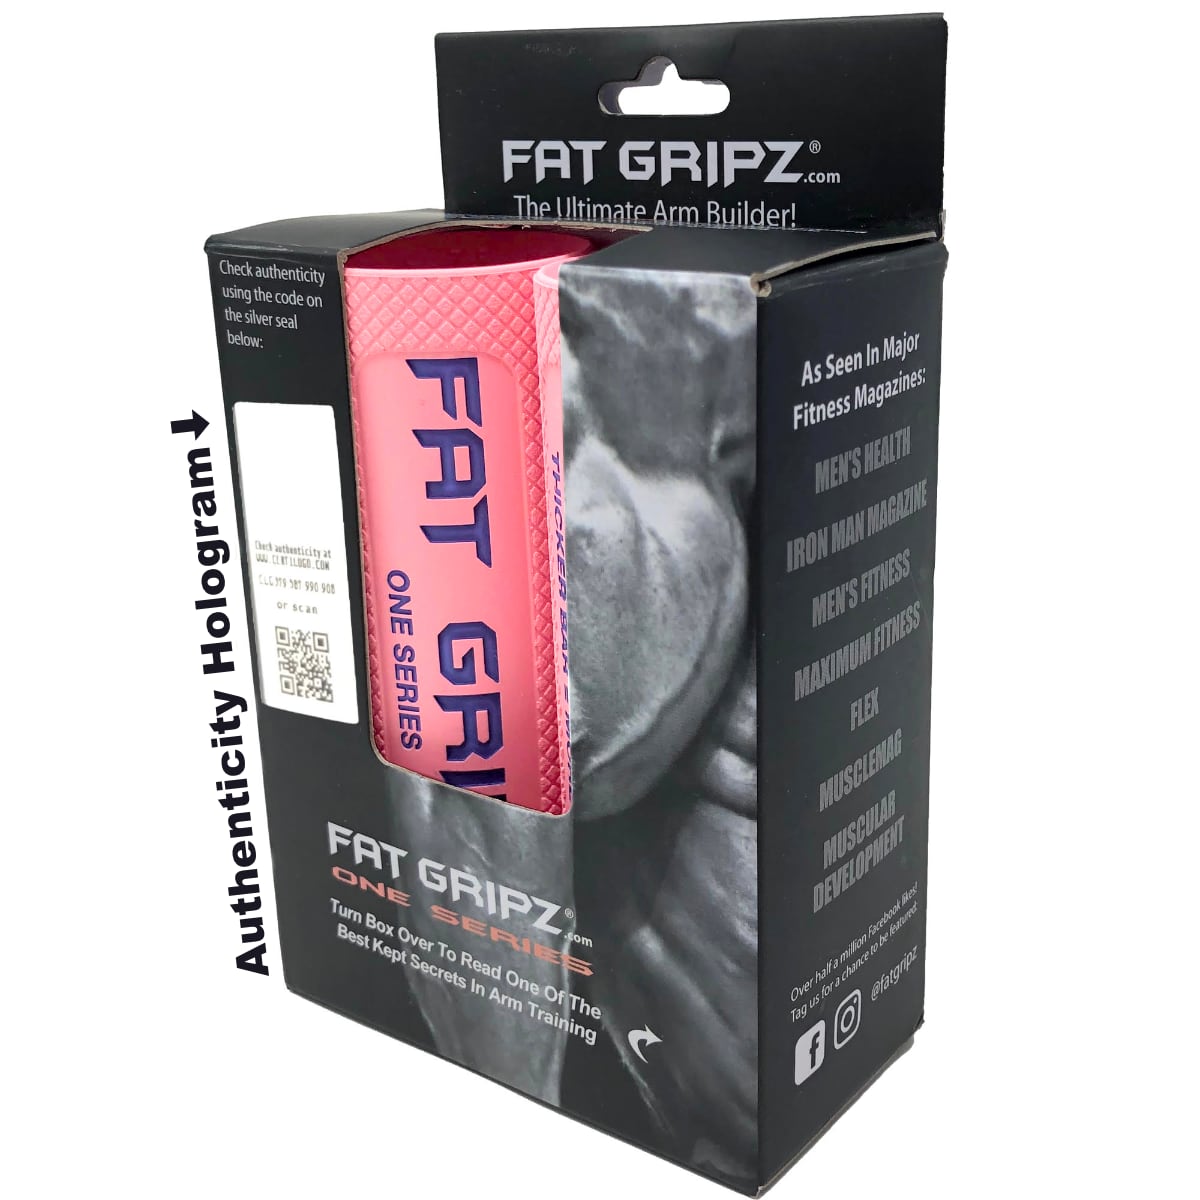 Fat Gripz Pink Fat Grips ( Weight Grips / Grips For Weight Lifting / Barbell Grips / Dumbbell Grips Thick Grips )